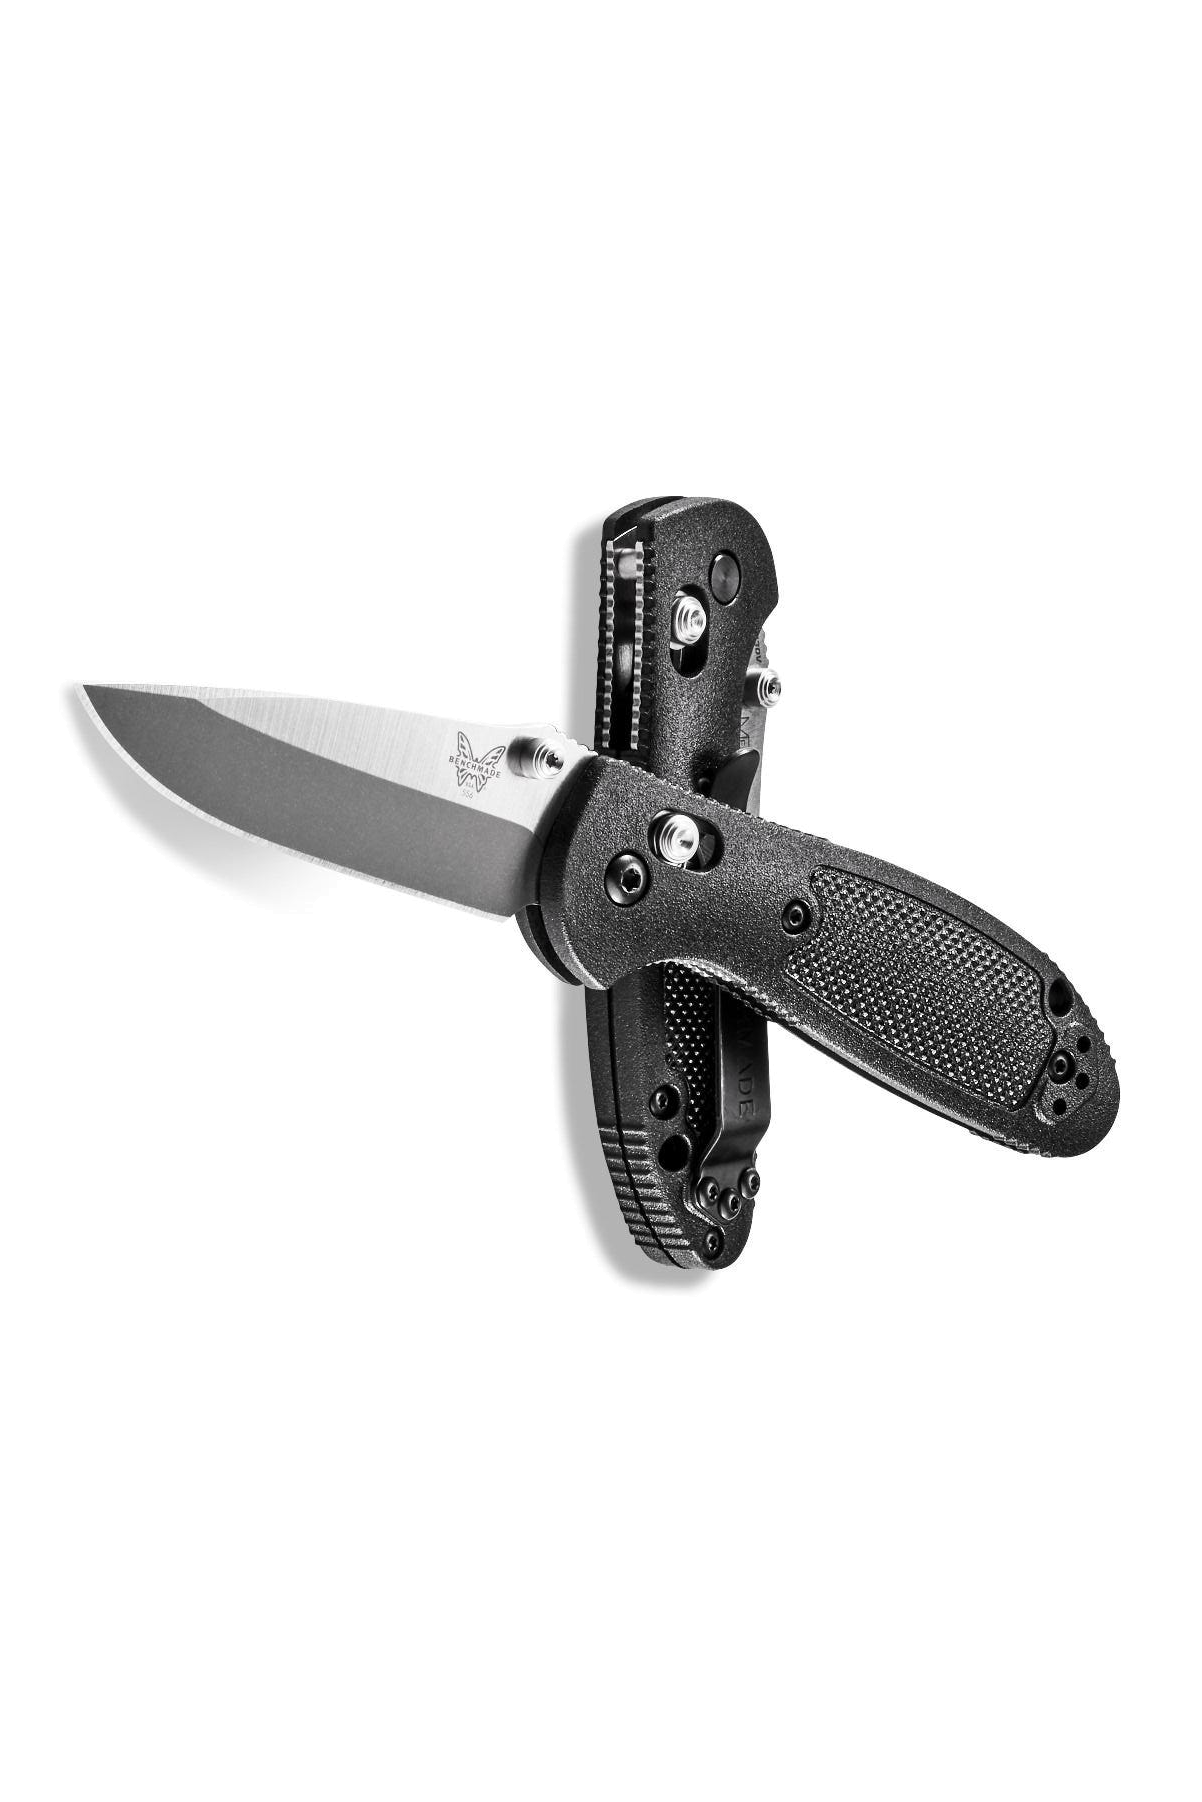 product image for Benchmade Griptilian 556 Multitool Knife